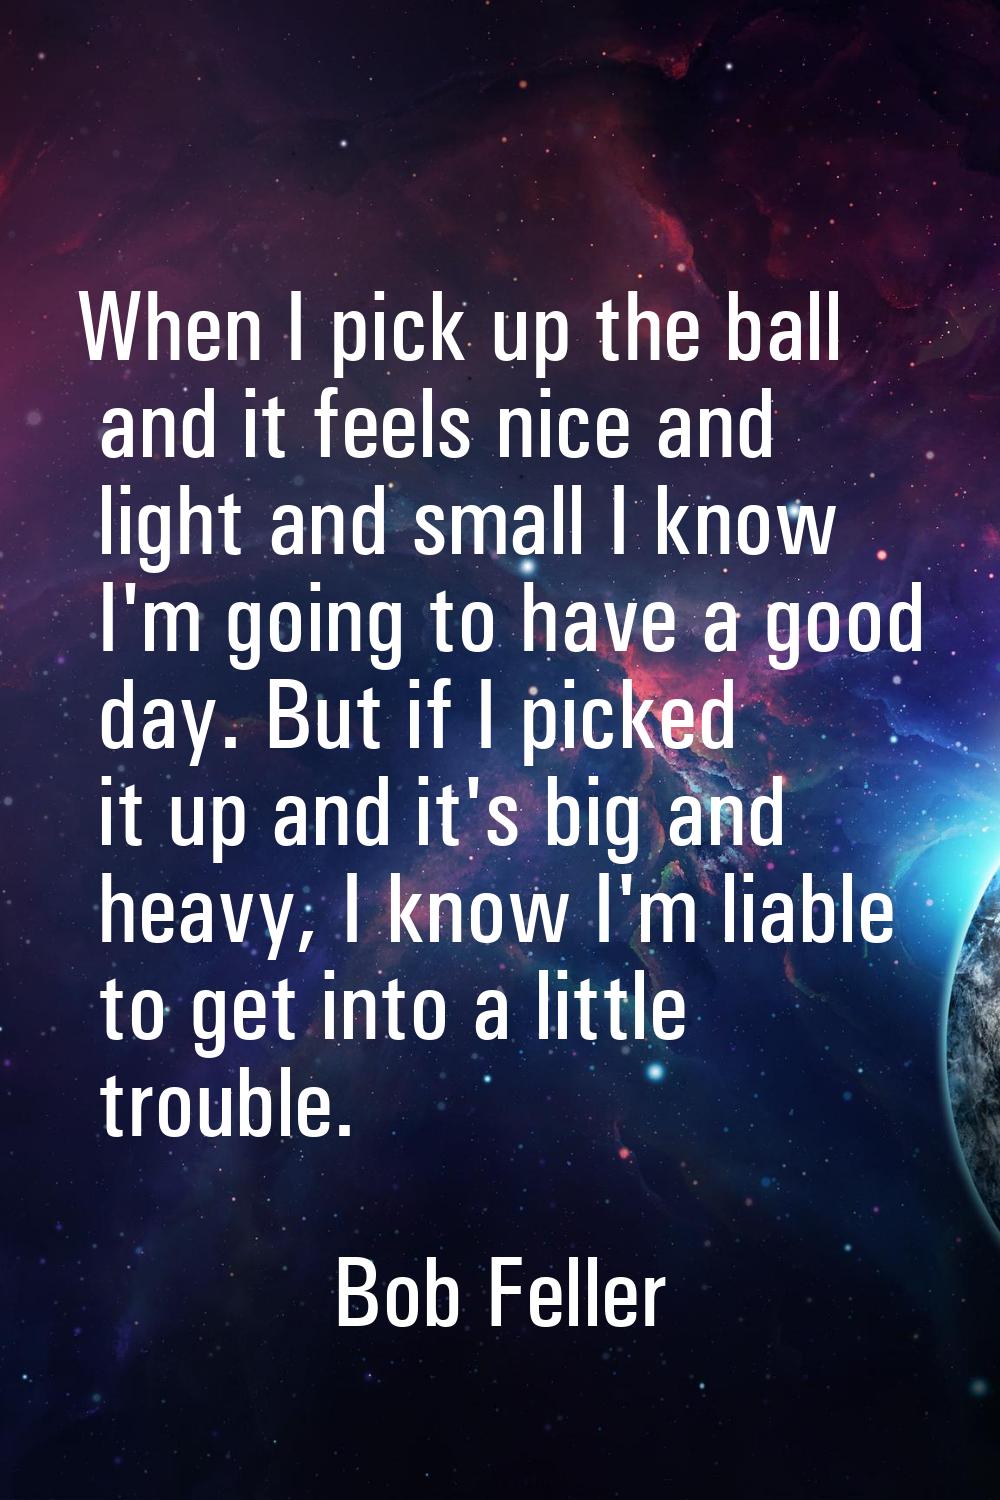 When I pick up the ball and it feels nice and light and small I know I'm going to have a good day. 